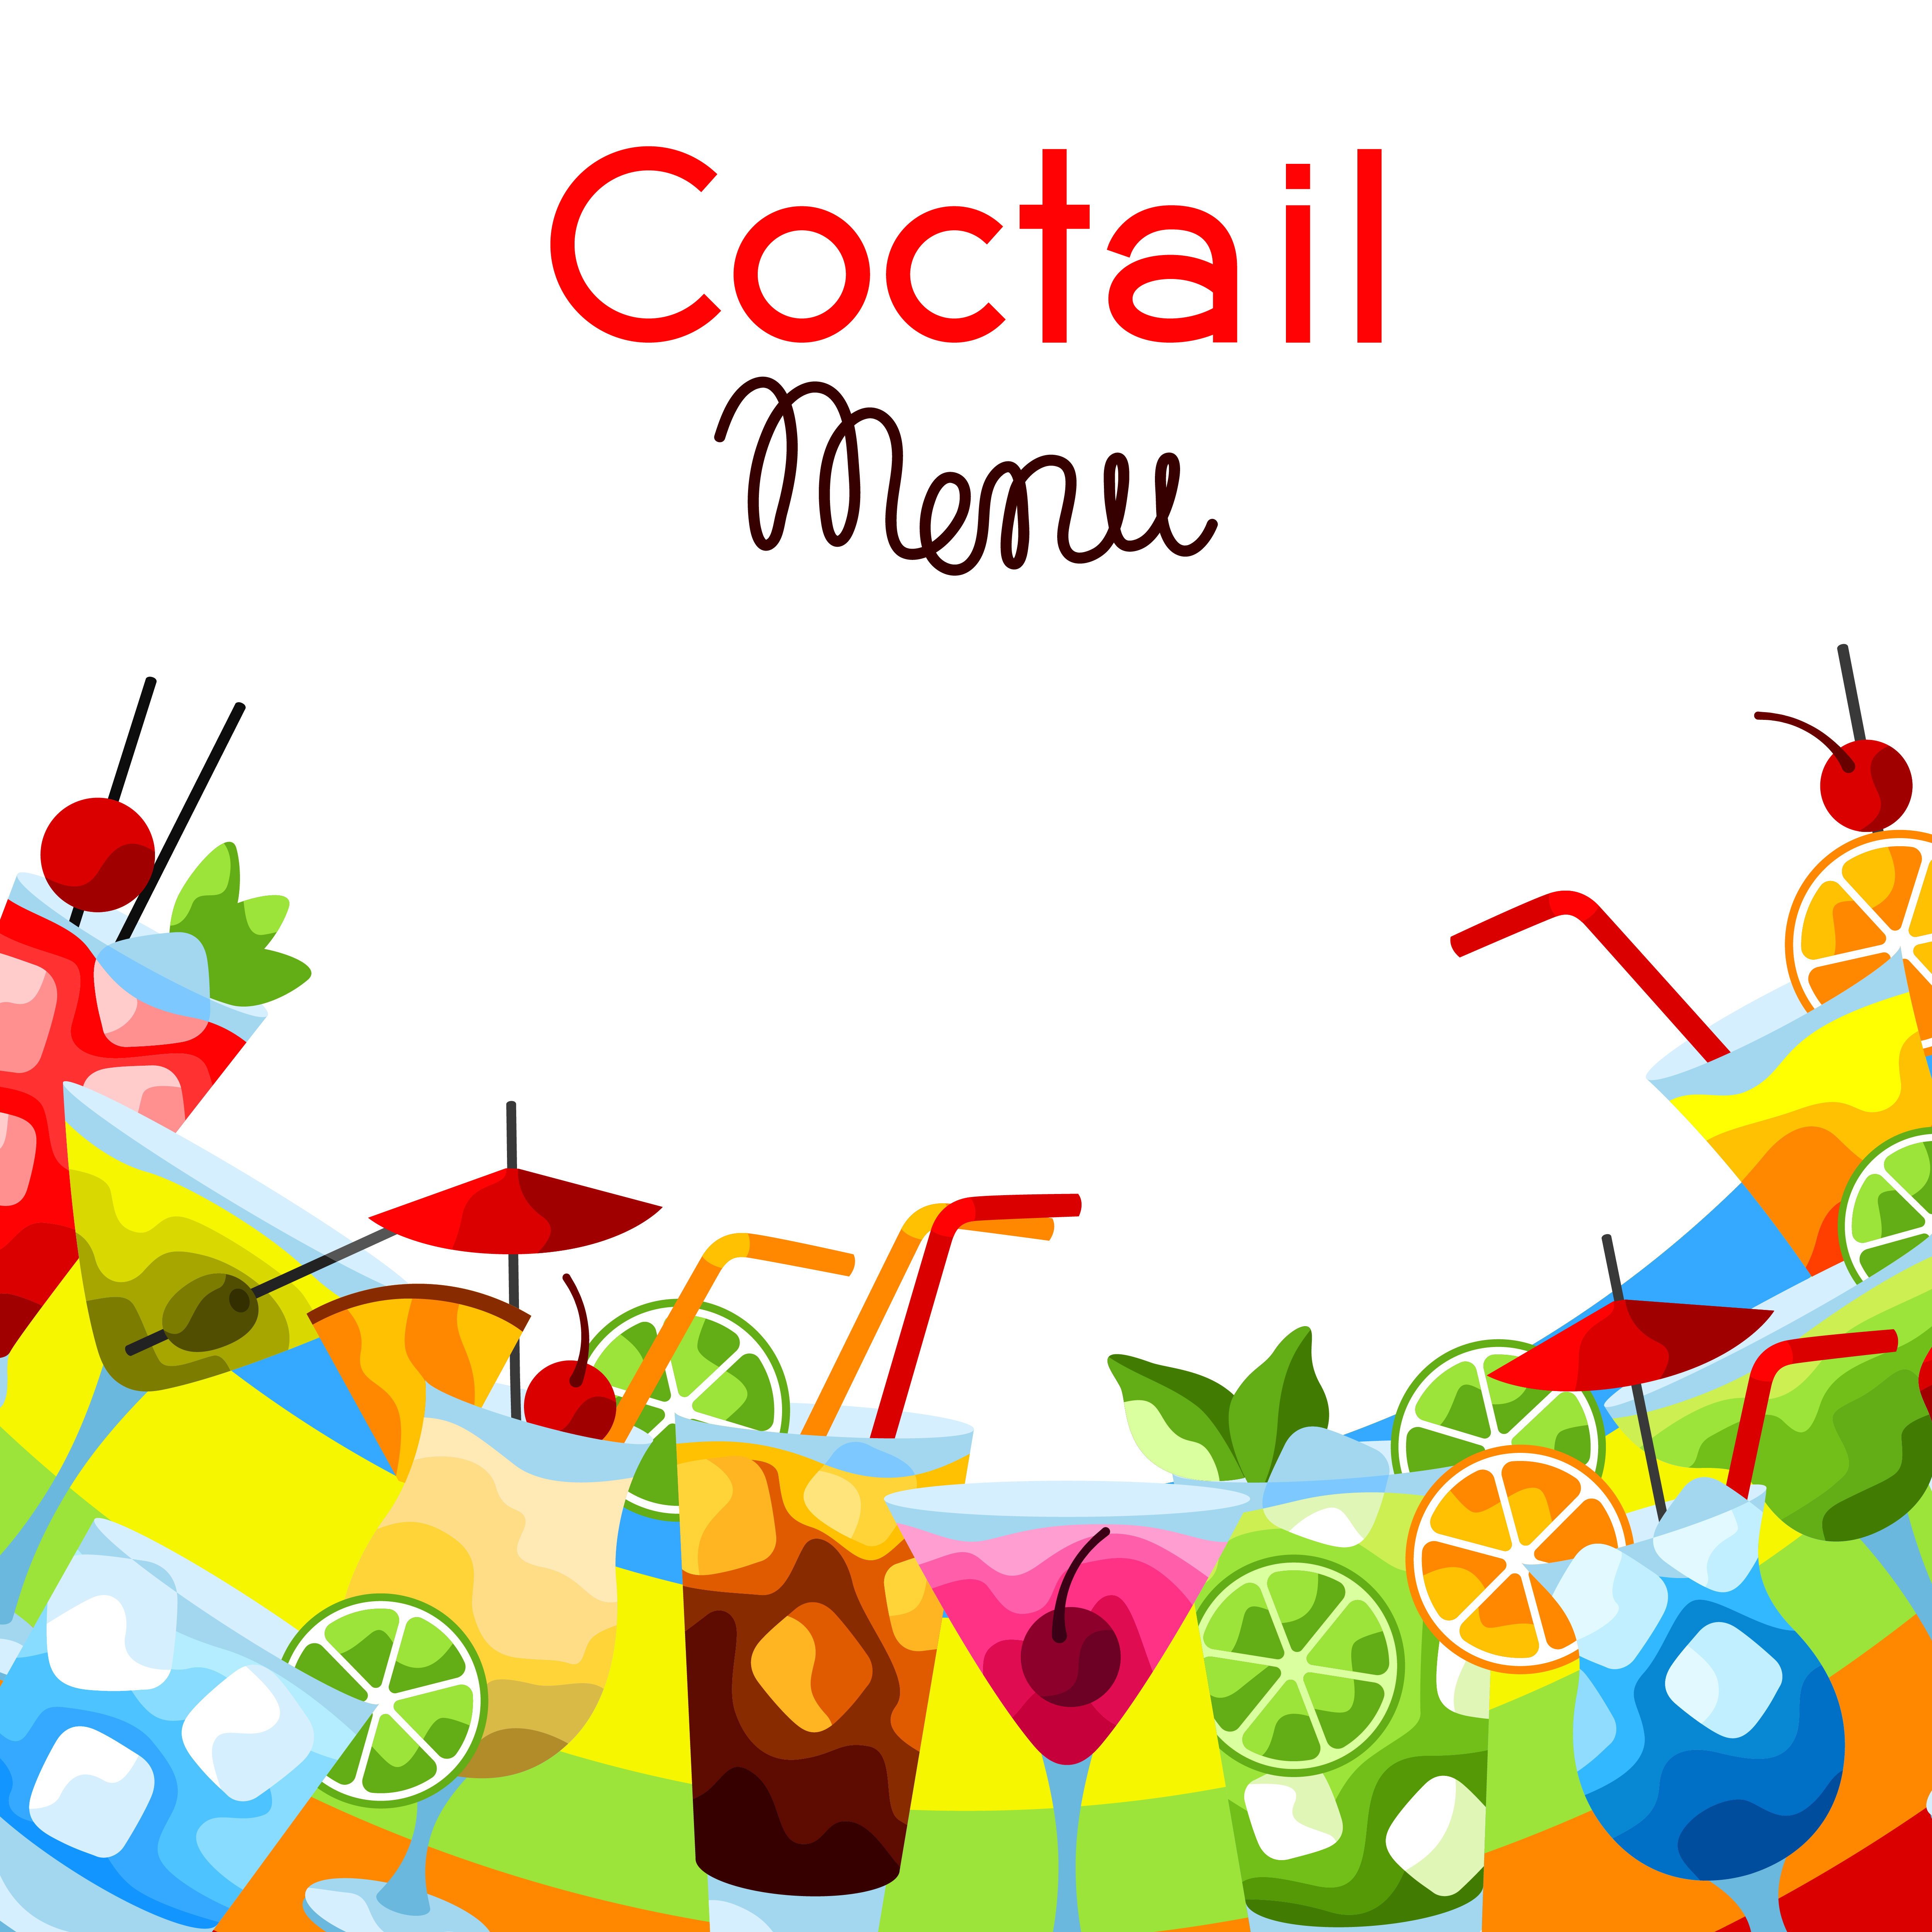 Background with alcohol cocktails. Stylized image of alcoholic beverages and drinks.. Background with alcohol cocktails.